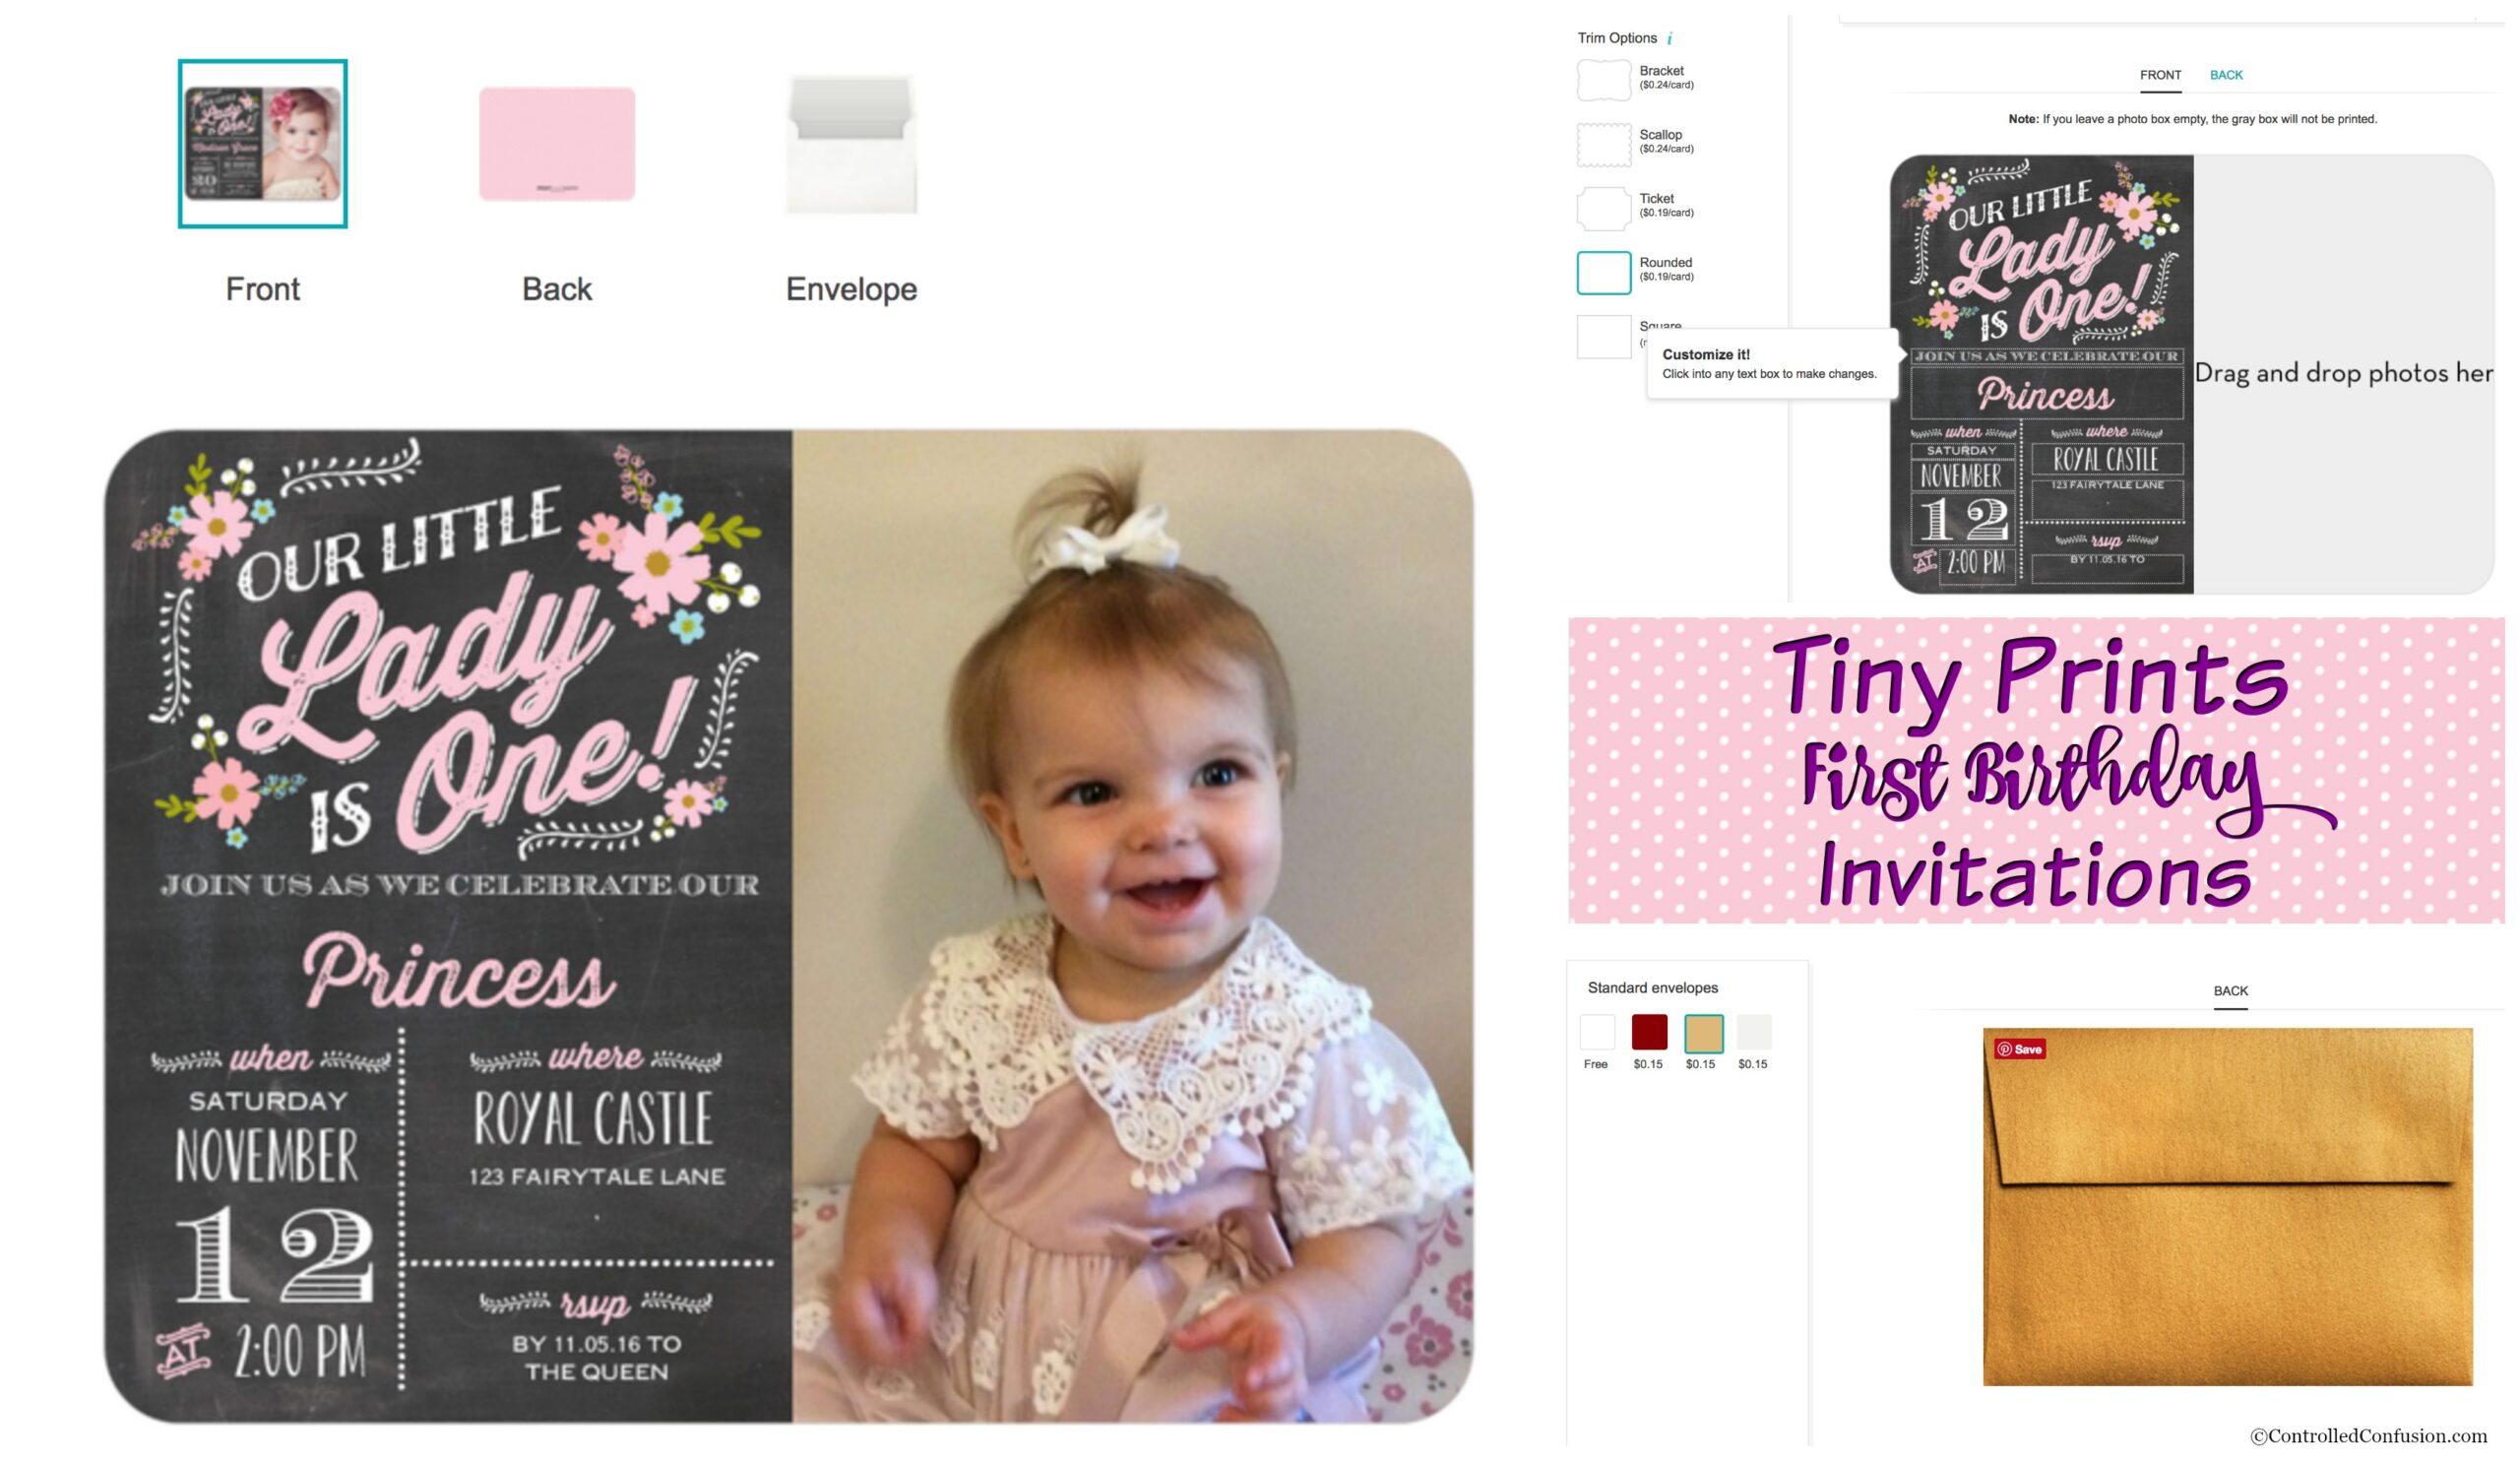 First Birthday Invitations to Impress With Tiny Prints